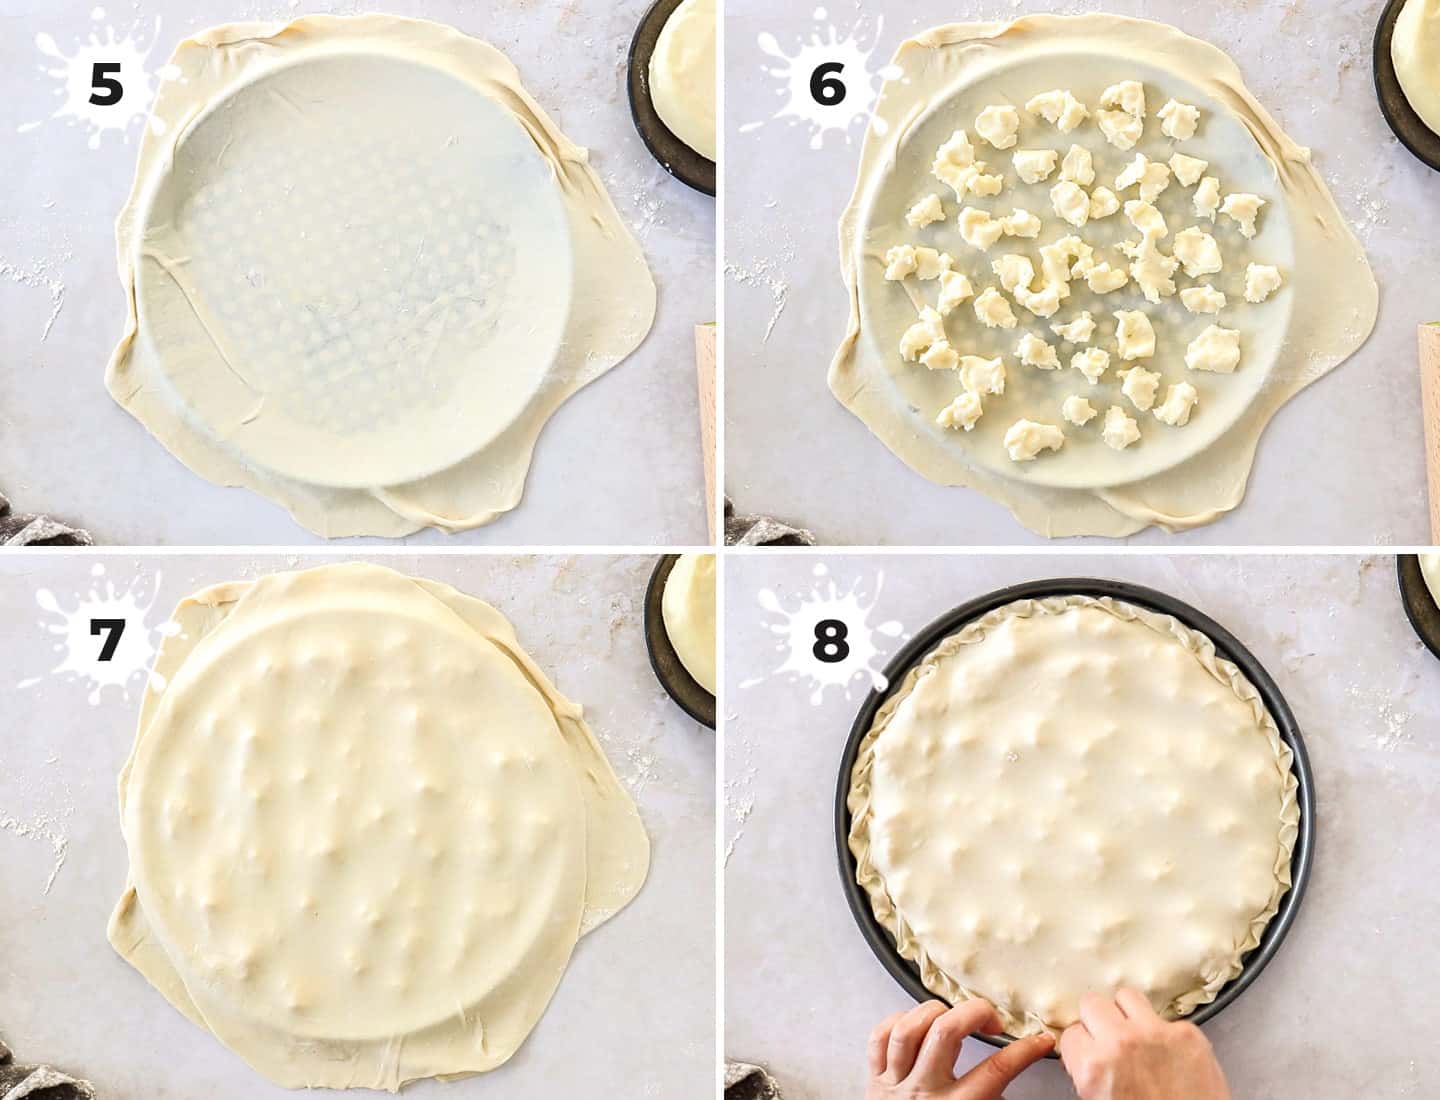 A collage of 4 images showing how to assemble focaccia di recco.